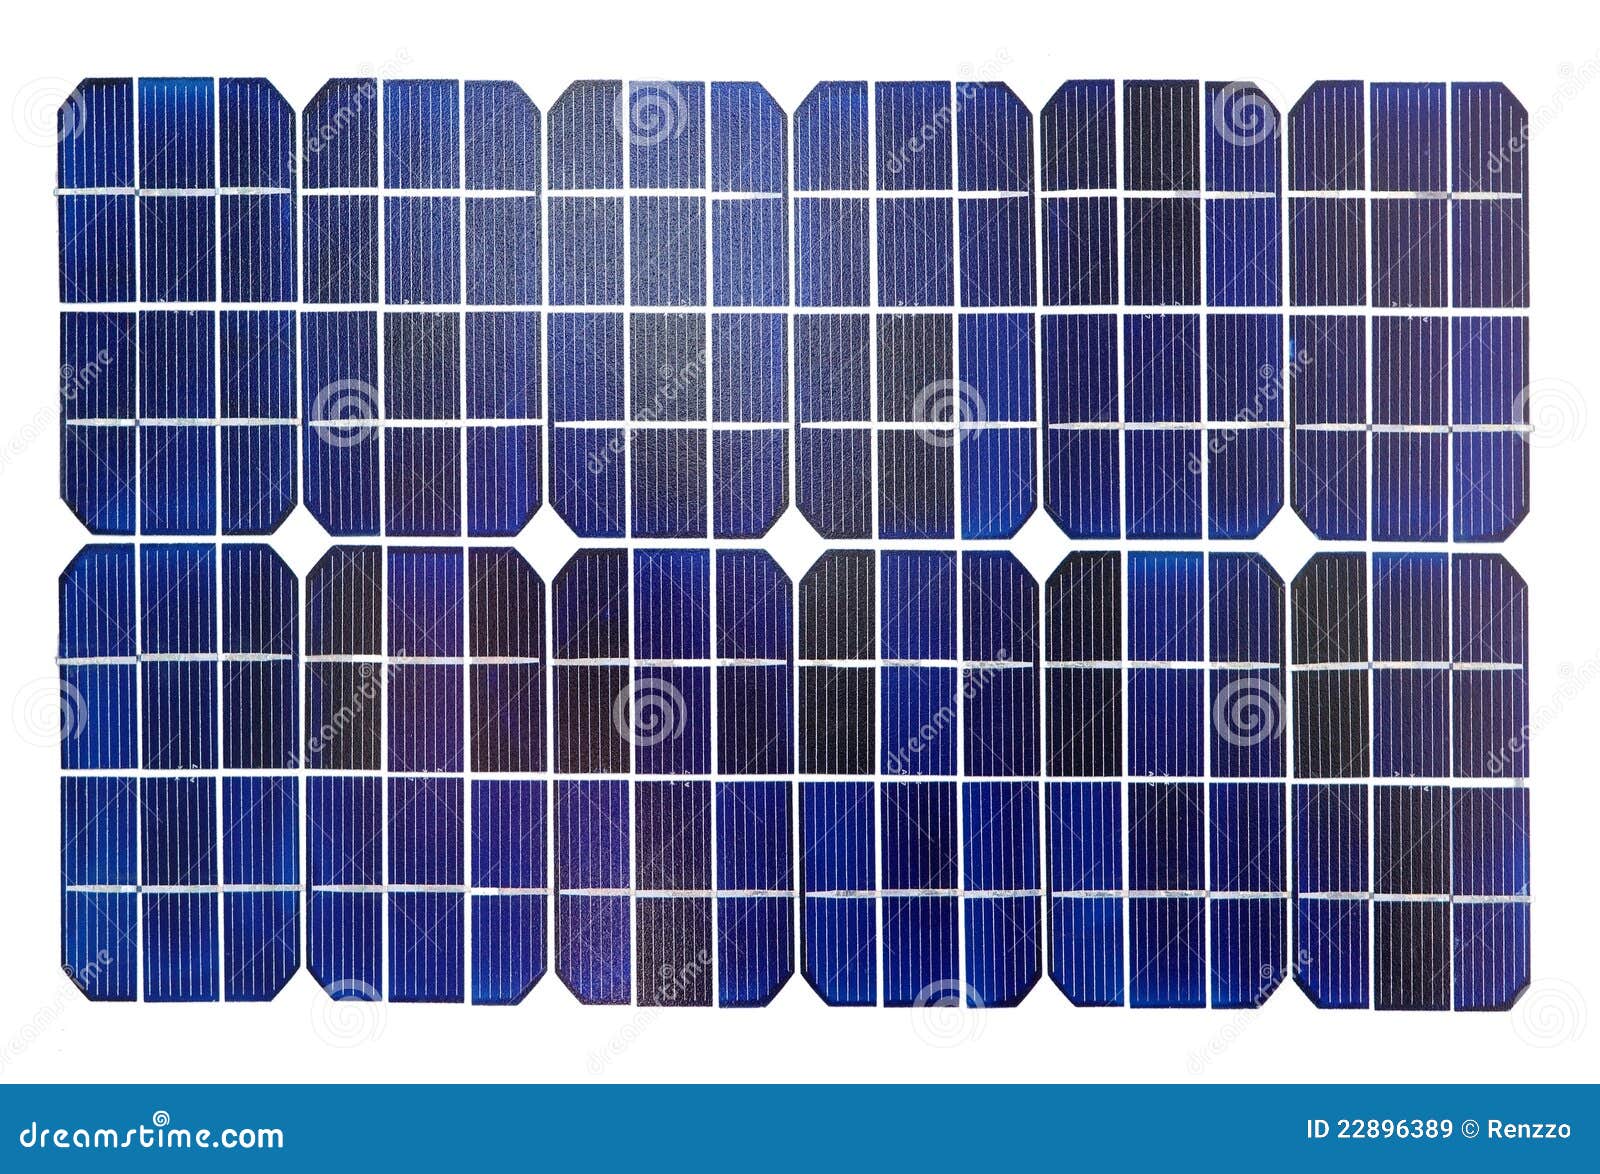 photovoltaic cells of a solar panel